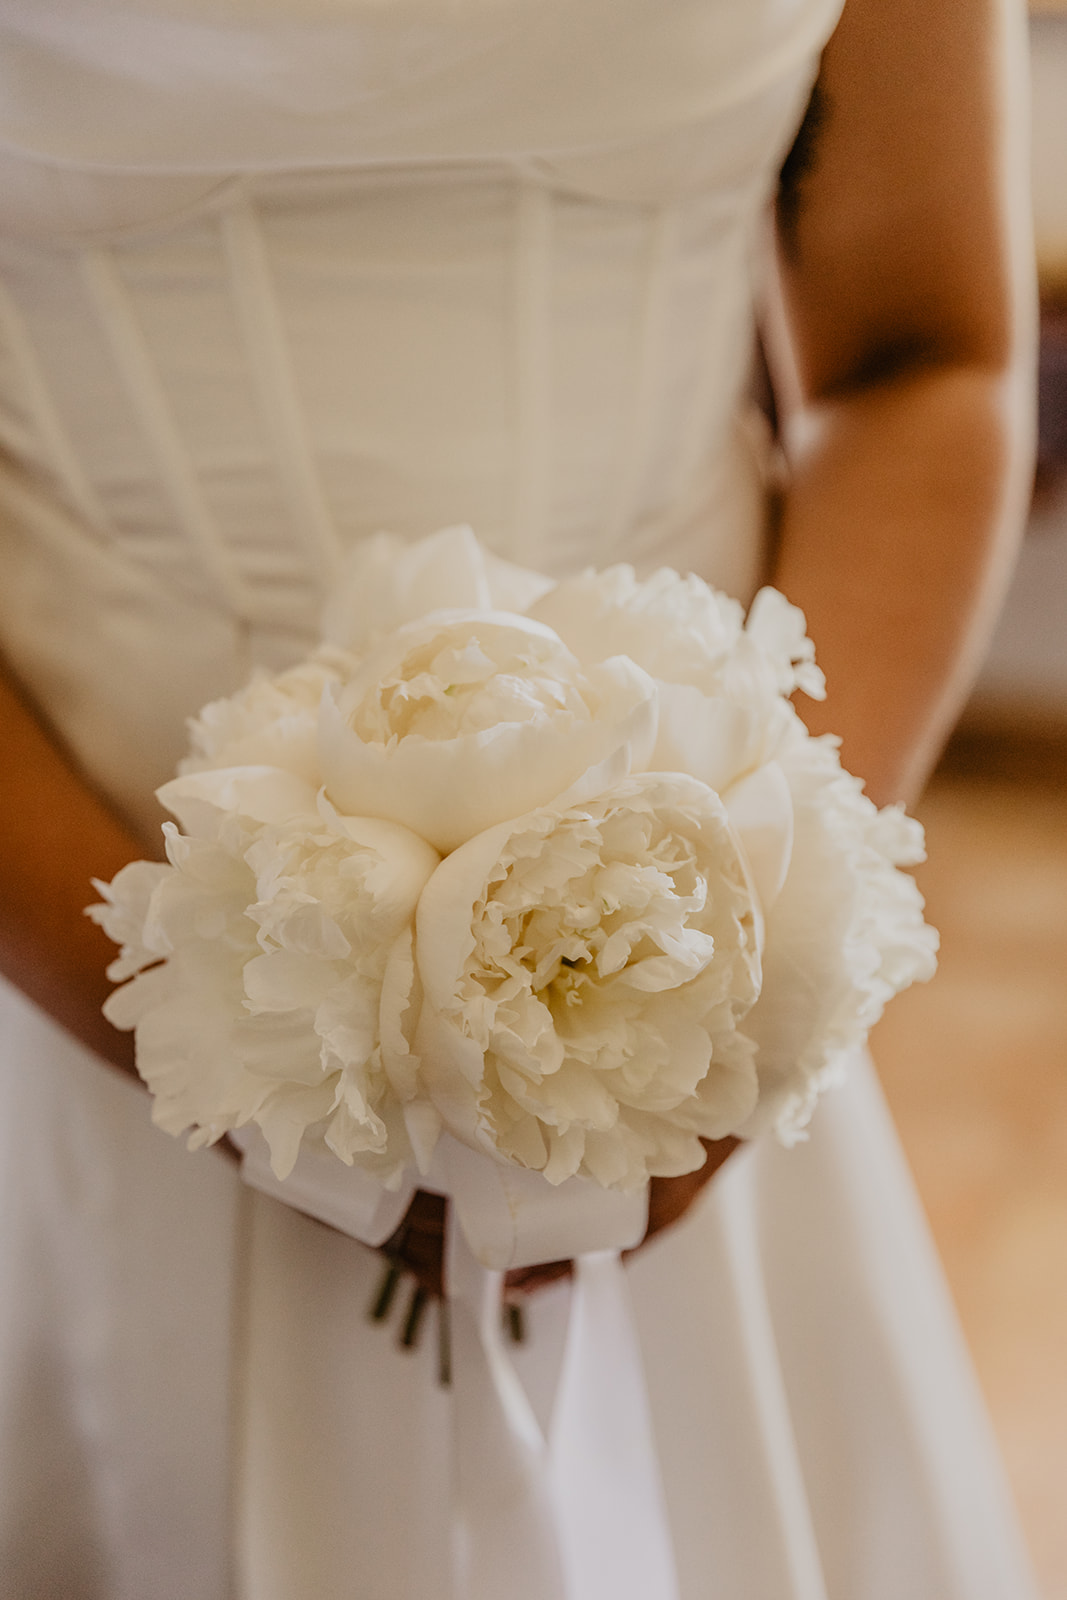 Bride and her bouquet at a France Destination Wedding. Photography and Videography by Olive Joy Photography